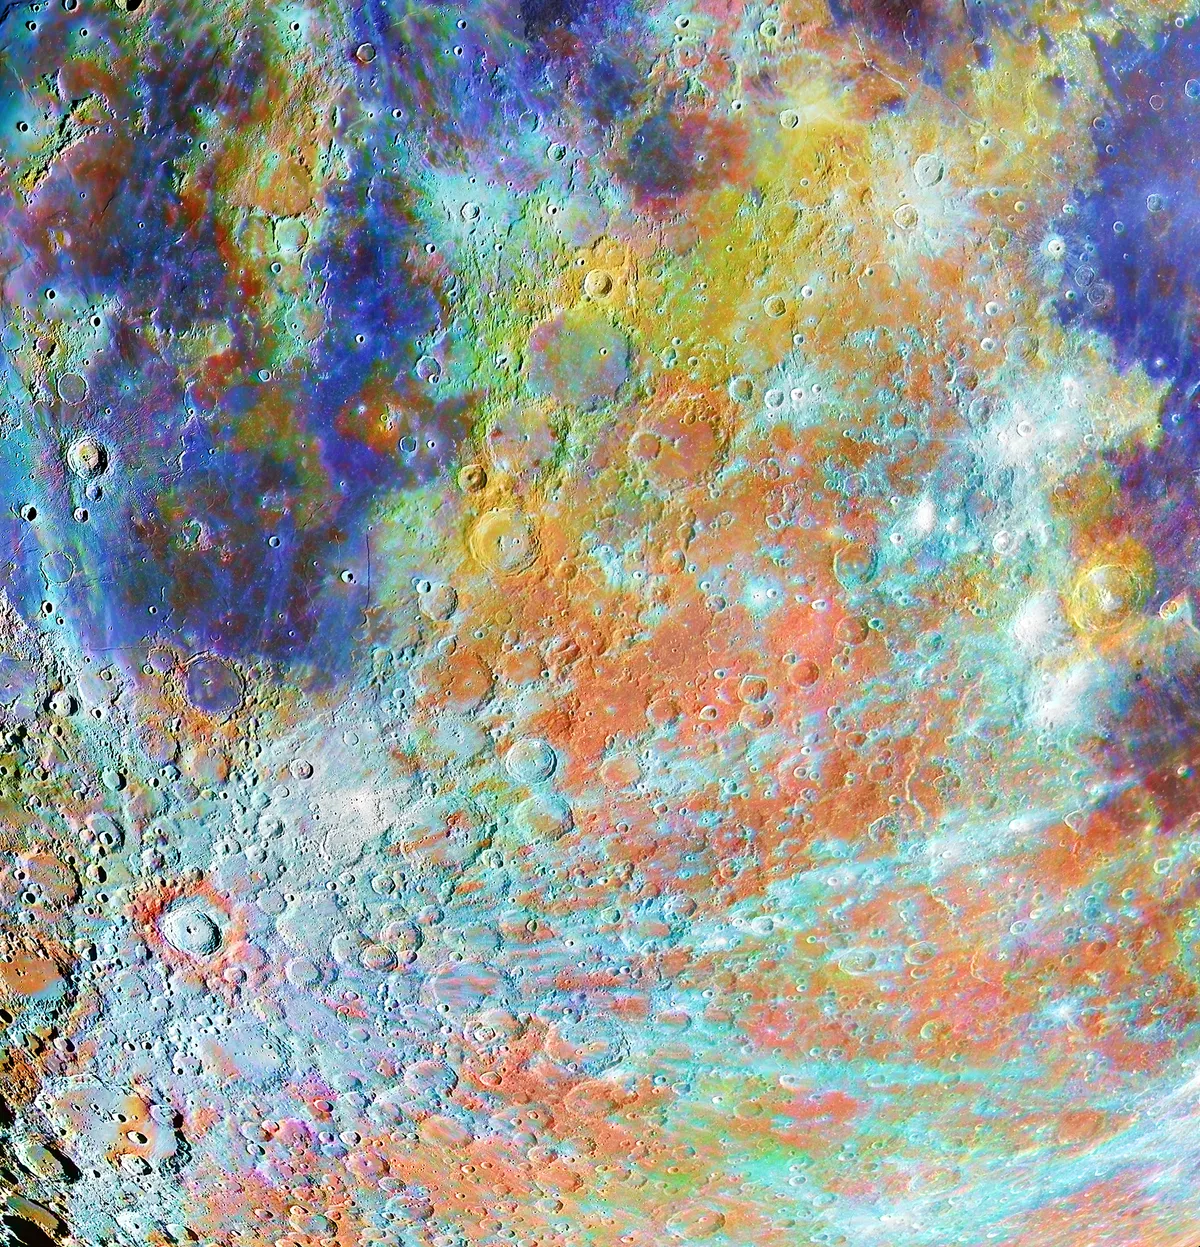 Tycho Crater Region with Colours Alain Paillou (France). Winner, Our Moon. Equipment: Celestron C9.25, Orion Sirius EQ-G mount, ZWO ASI178MM and ASI178MC cameras.